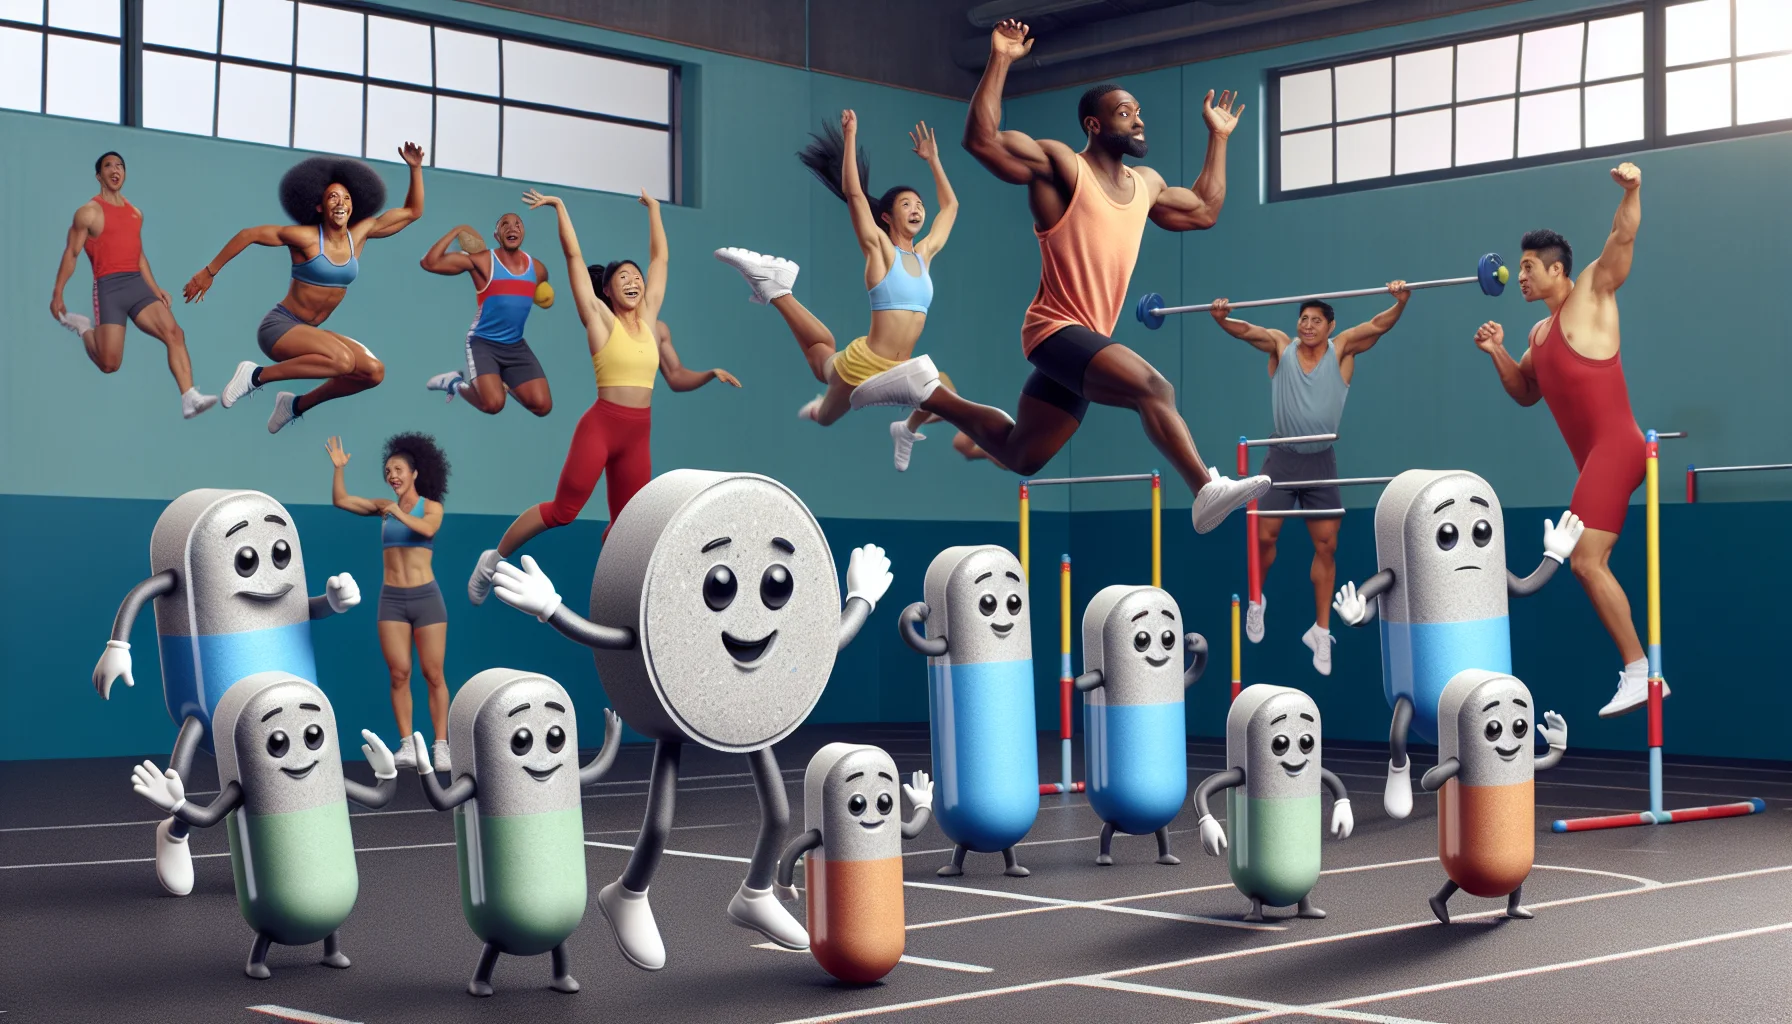 Create a humorous and enticing scene that encourages the use of supplemental magnesium for sports, using no specific brand. Imagine a colourful and quirky gym setting. In the foreground, anthropomorphized magnesium pills, shaped like small pellets and brightly coloured, cartwheel and high jump with faces full of enthusiasm. They're not just participating, but sailing through the sports activities with ease, perhaps even out-performing some of the human gym-goers. Also present are a diverse range of amused human athletes, watching these magnesium supplement characters in awe. The male South Asian weightlifter and the female black sprinter, among others, share surprised yet inspired expressions.